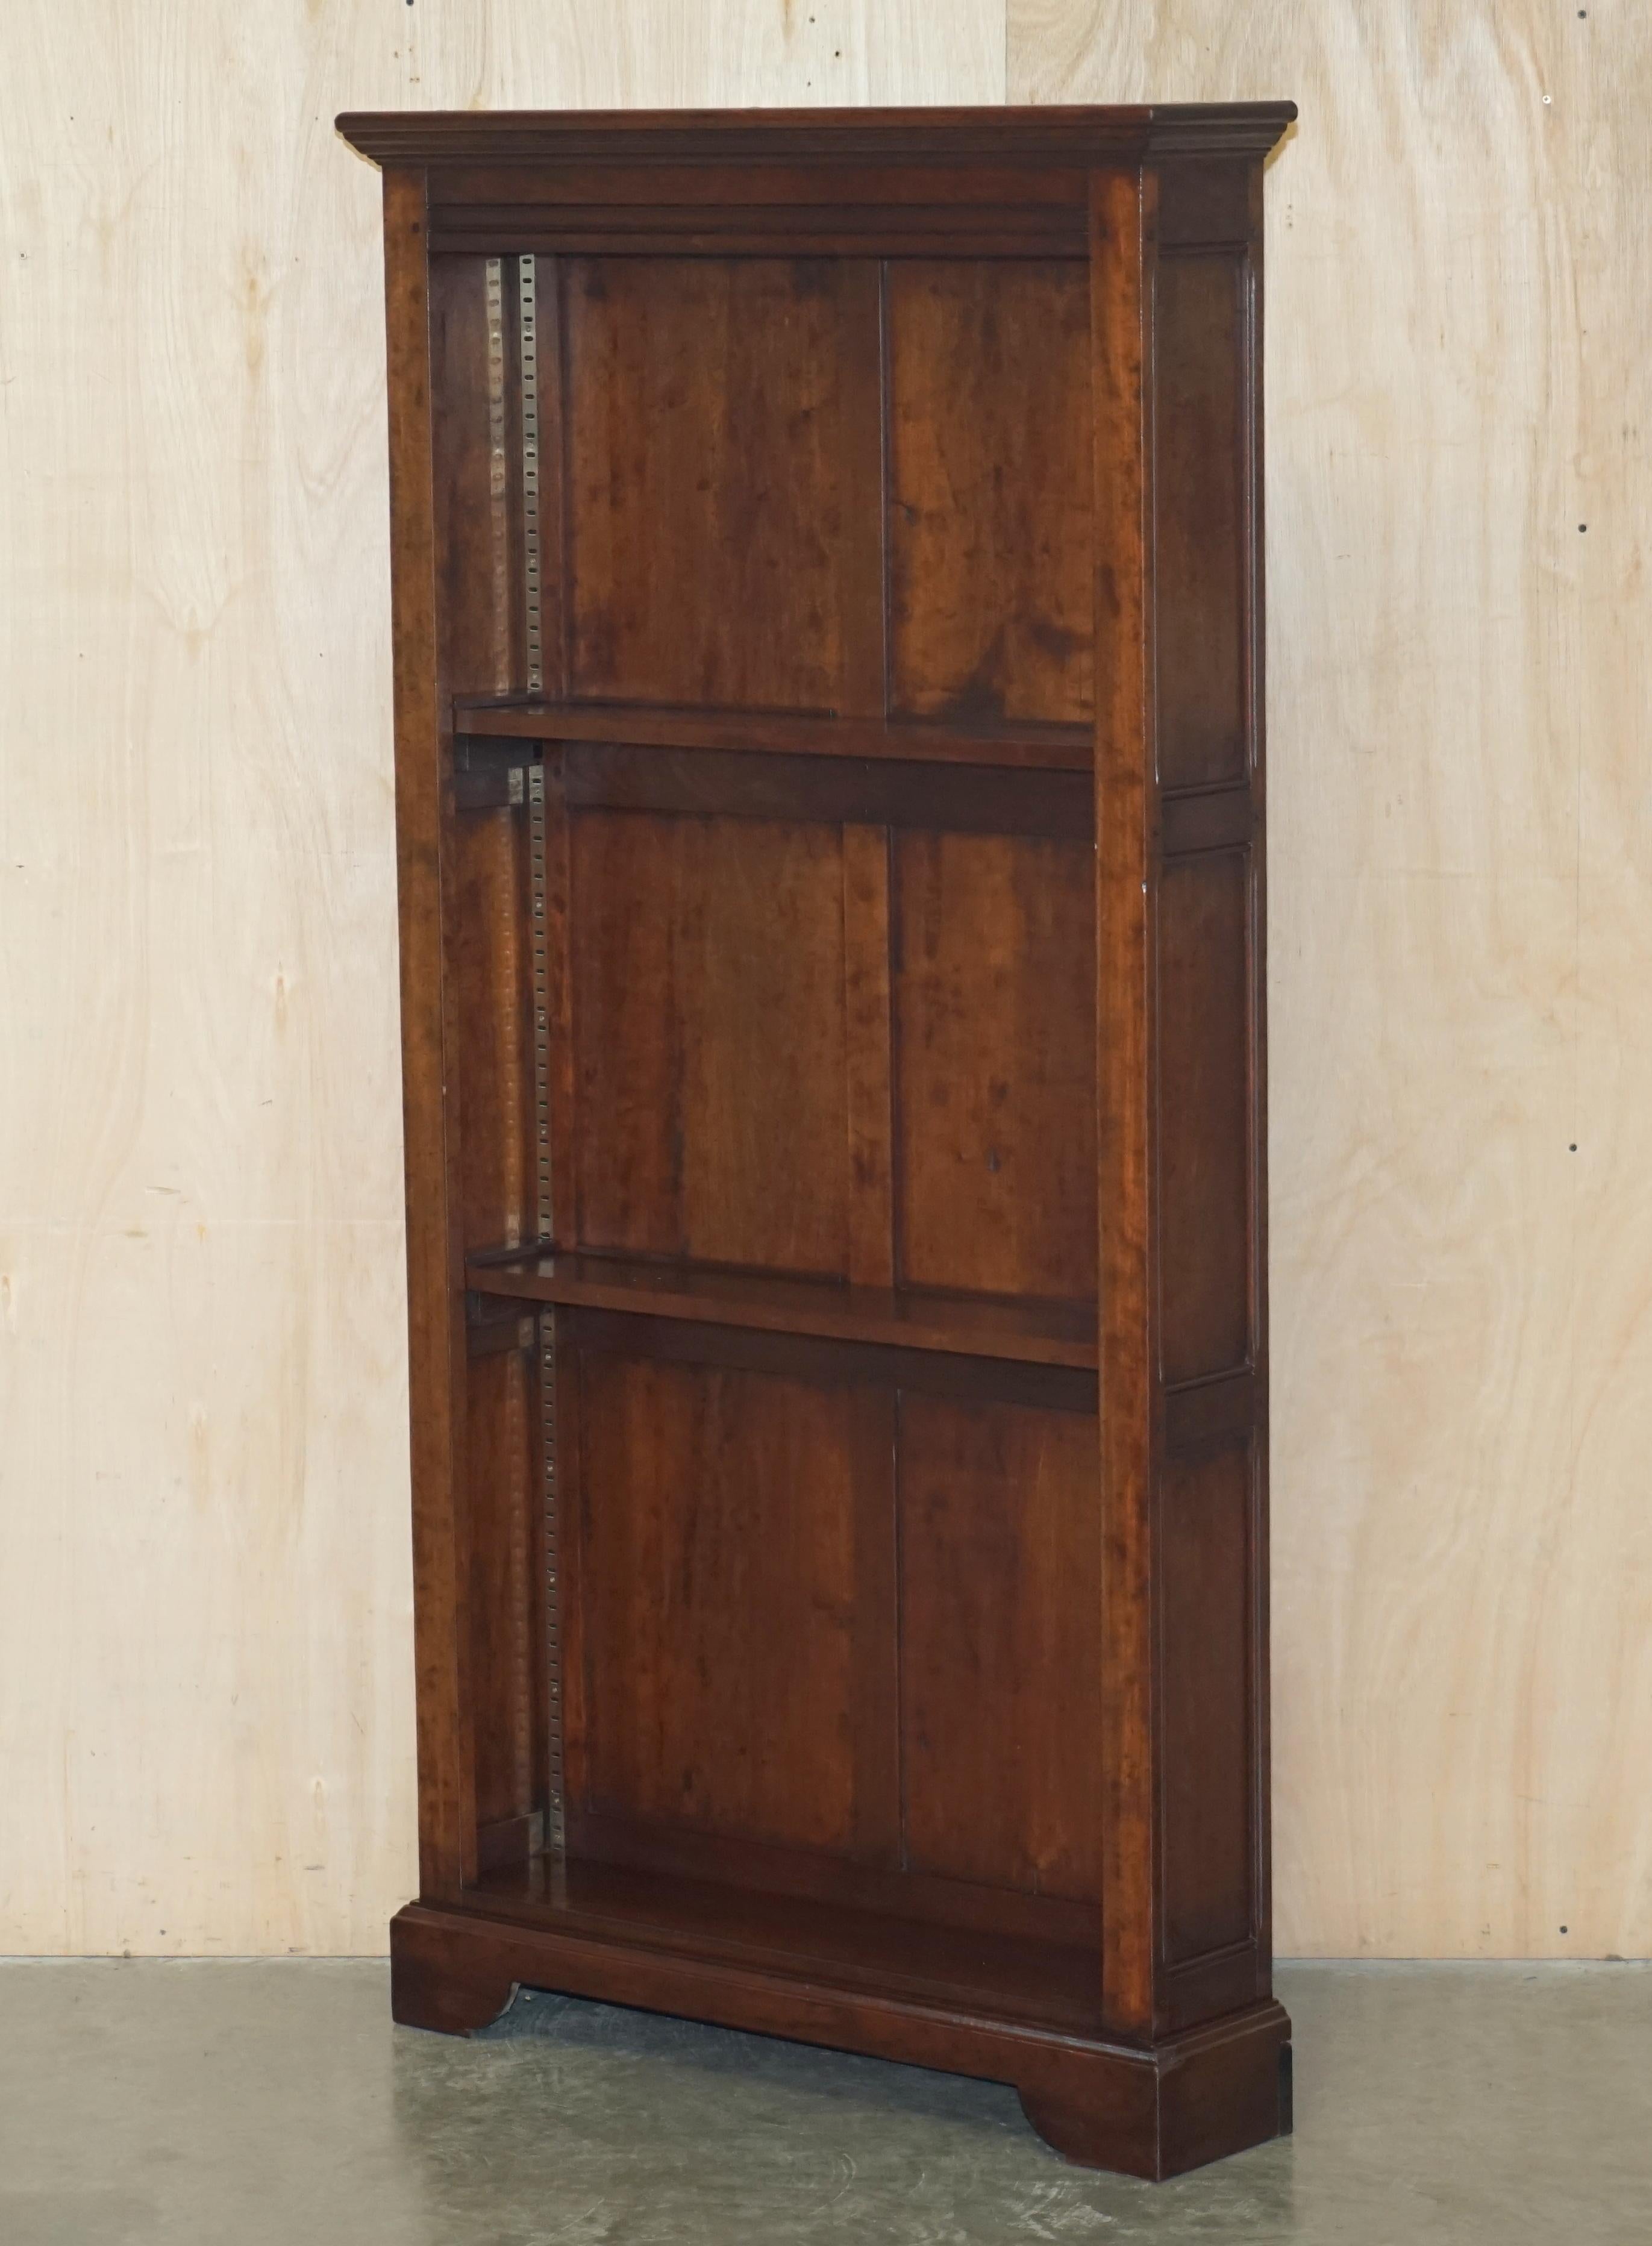 Royal House Antiques

Royal House Antiques is delighted to offer for sale this very good looking and well made pair of circa 1900 English mahogany paneled library bookcases with height adjustable shelves 

Please note the delivery fee listed is just